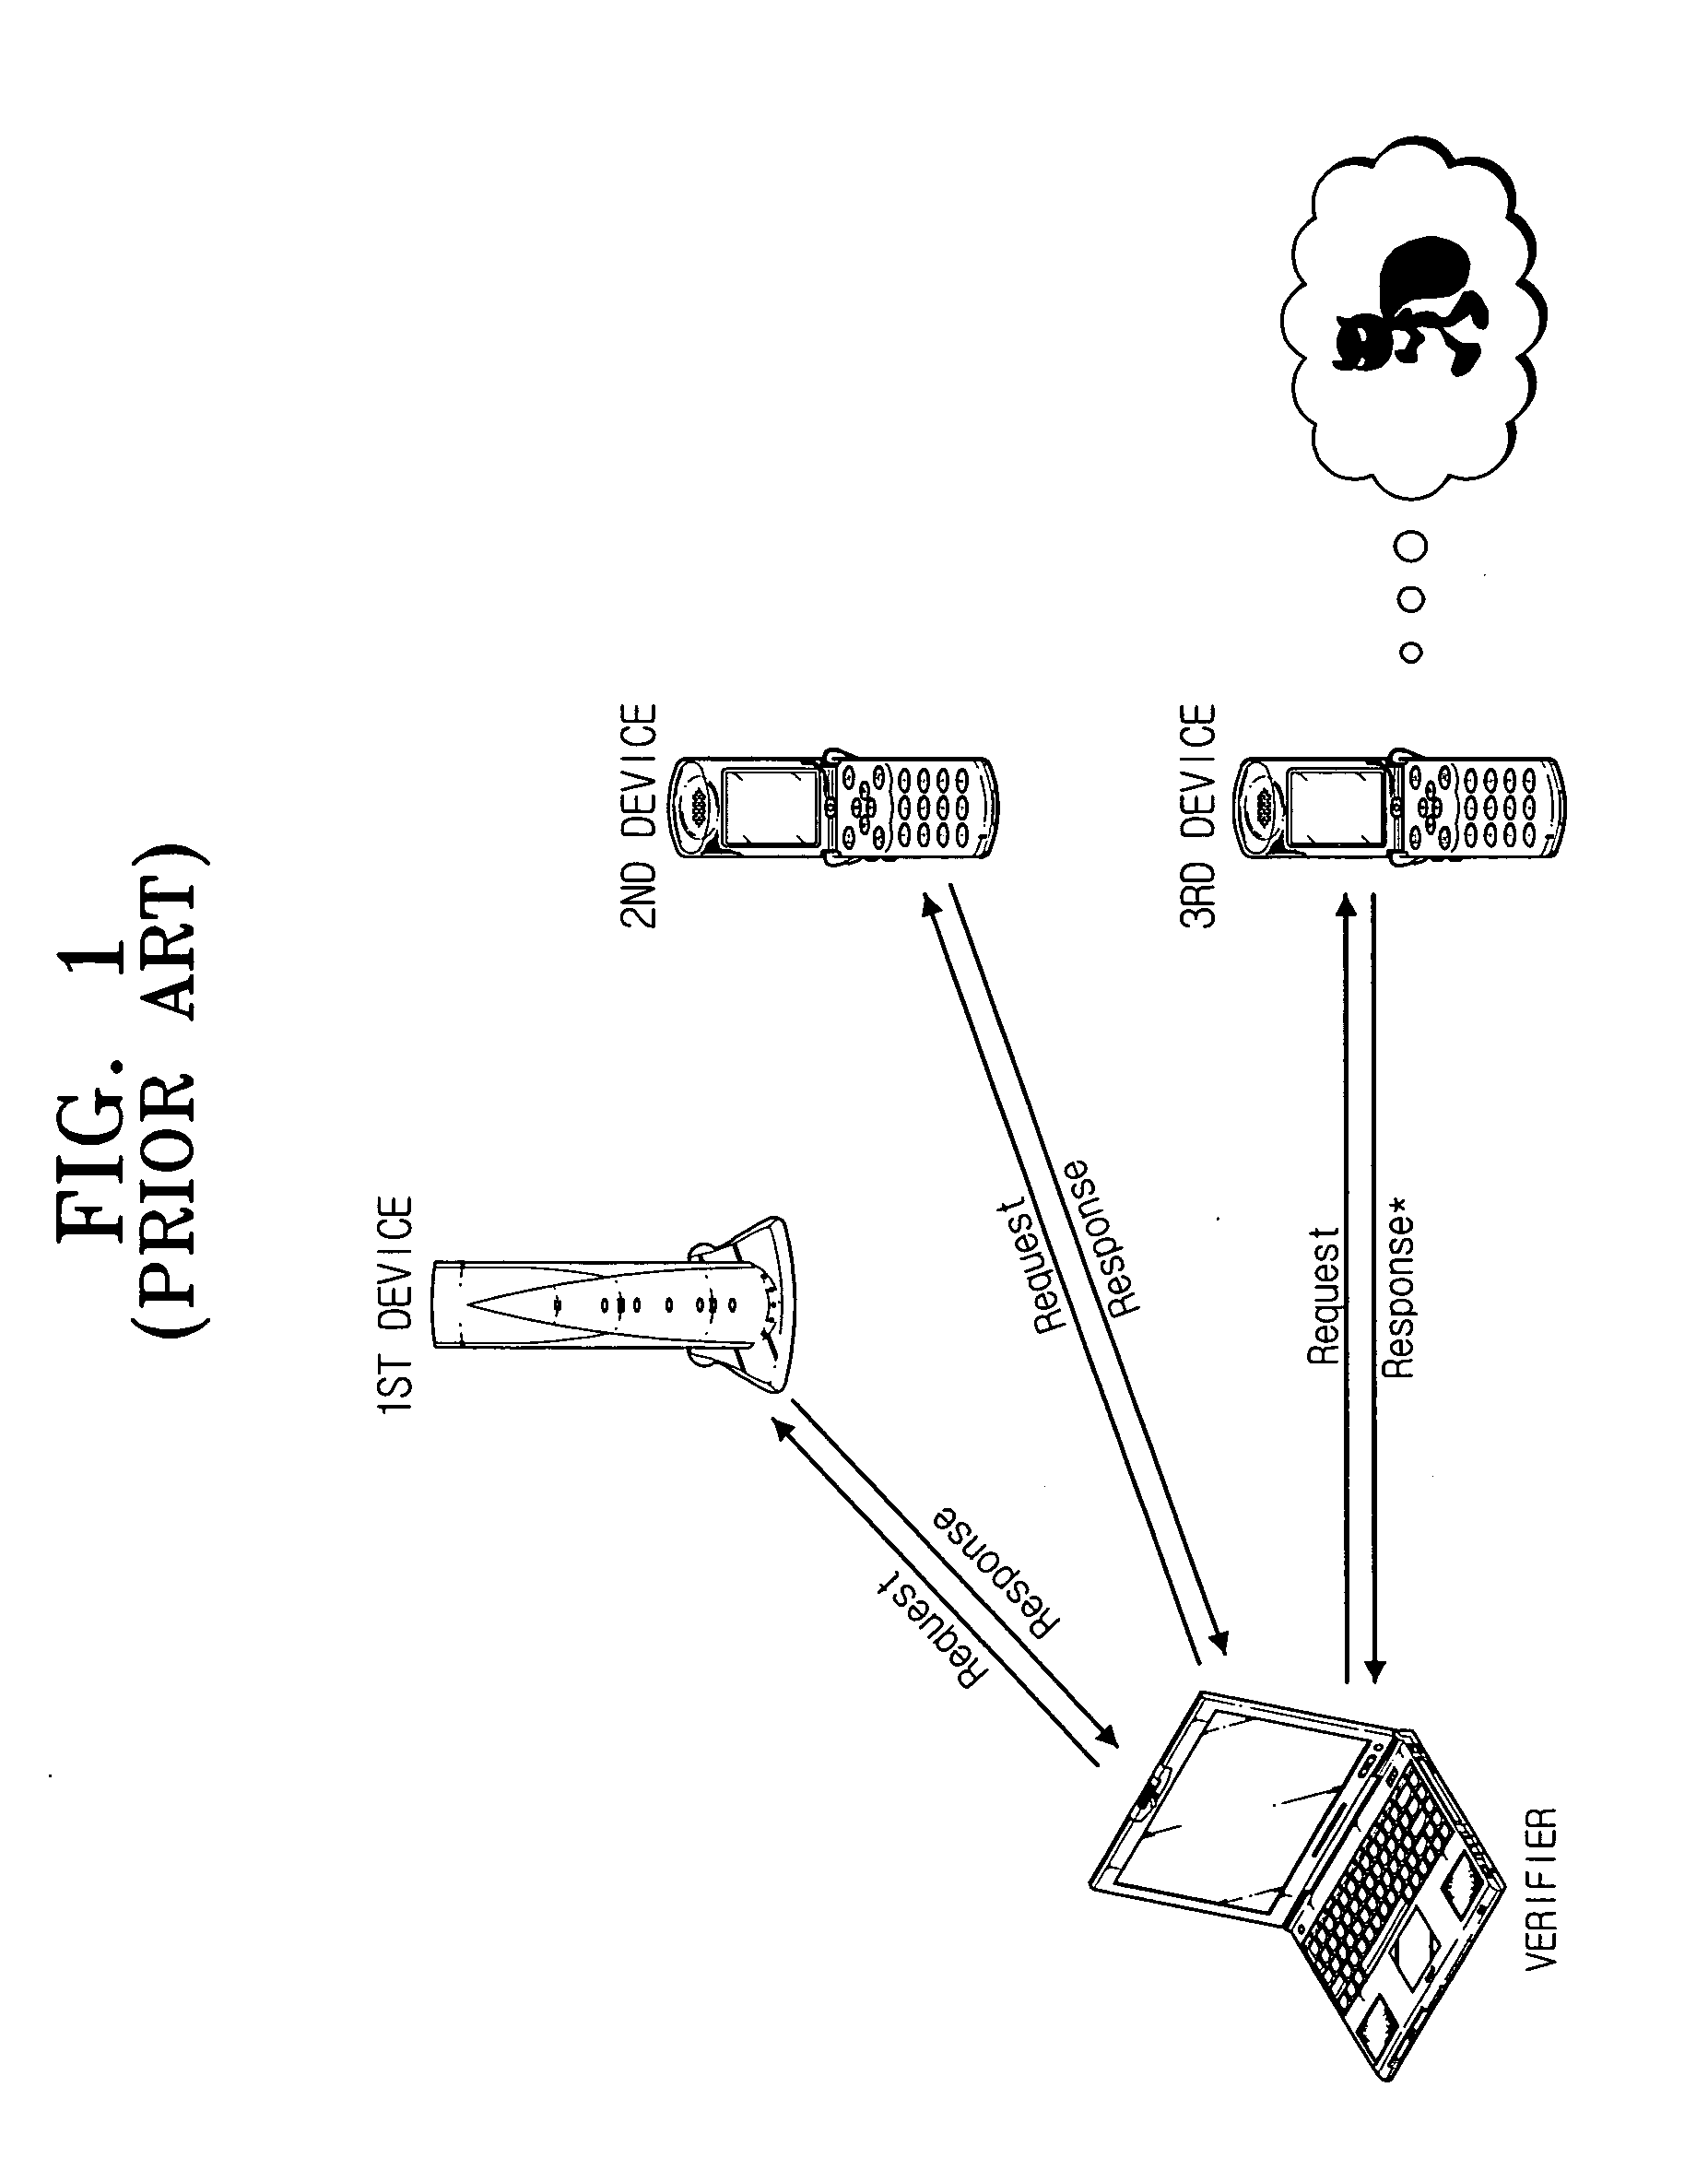 Method and apparatus for remotely verifying memory integrity of a device